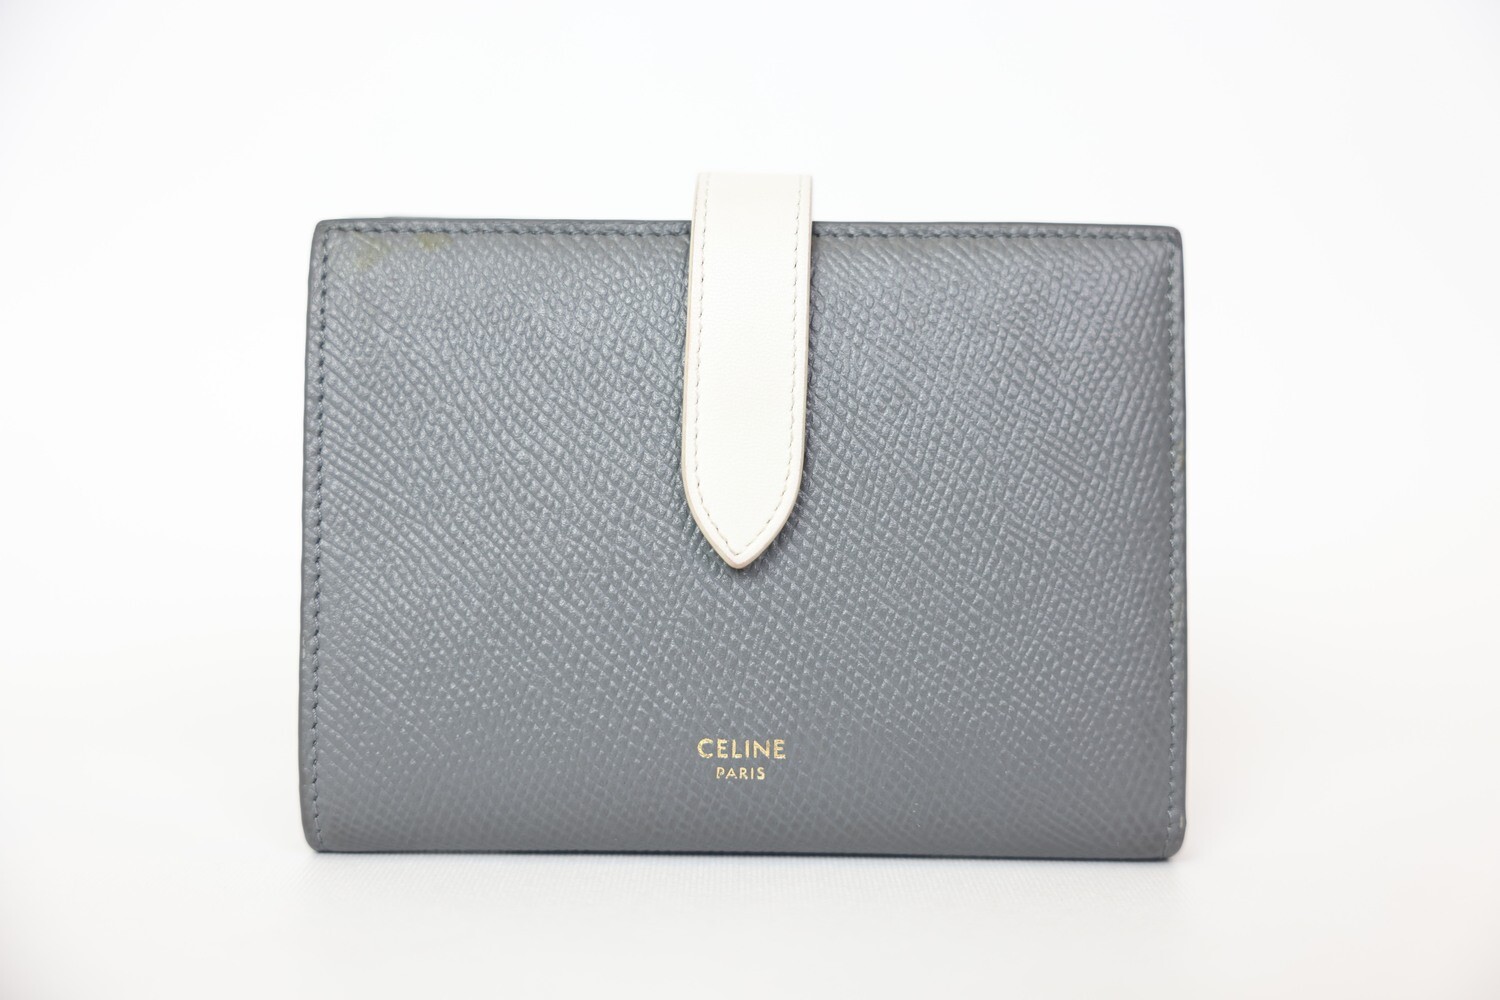 Celine Strap Wallet Medium, Gray Leather Preowned In Box WA001